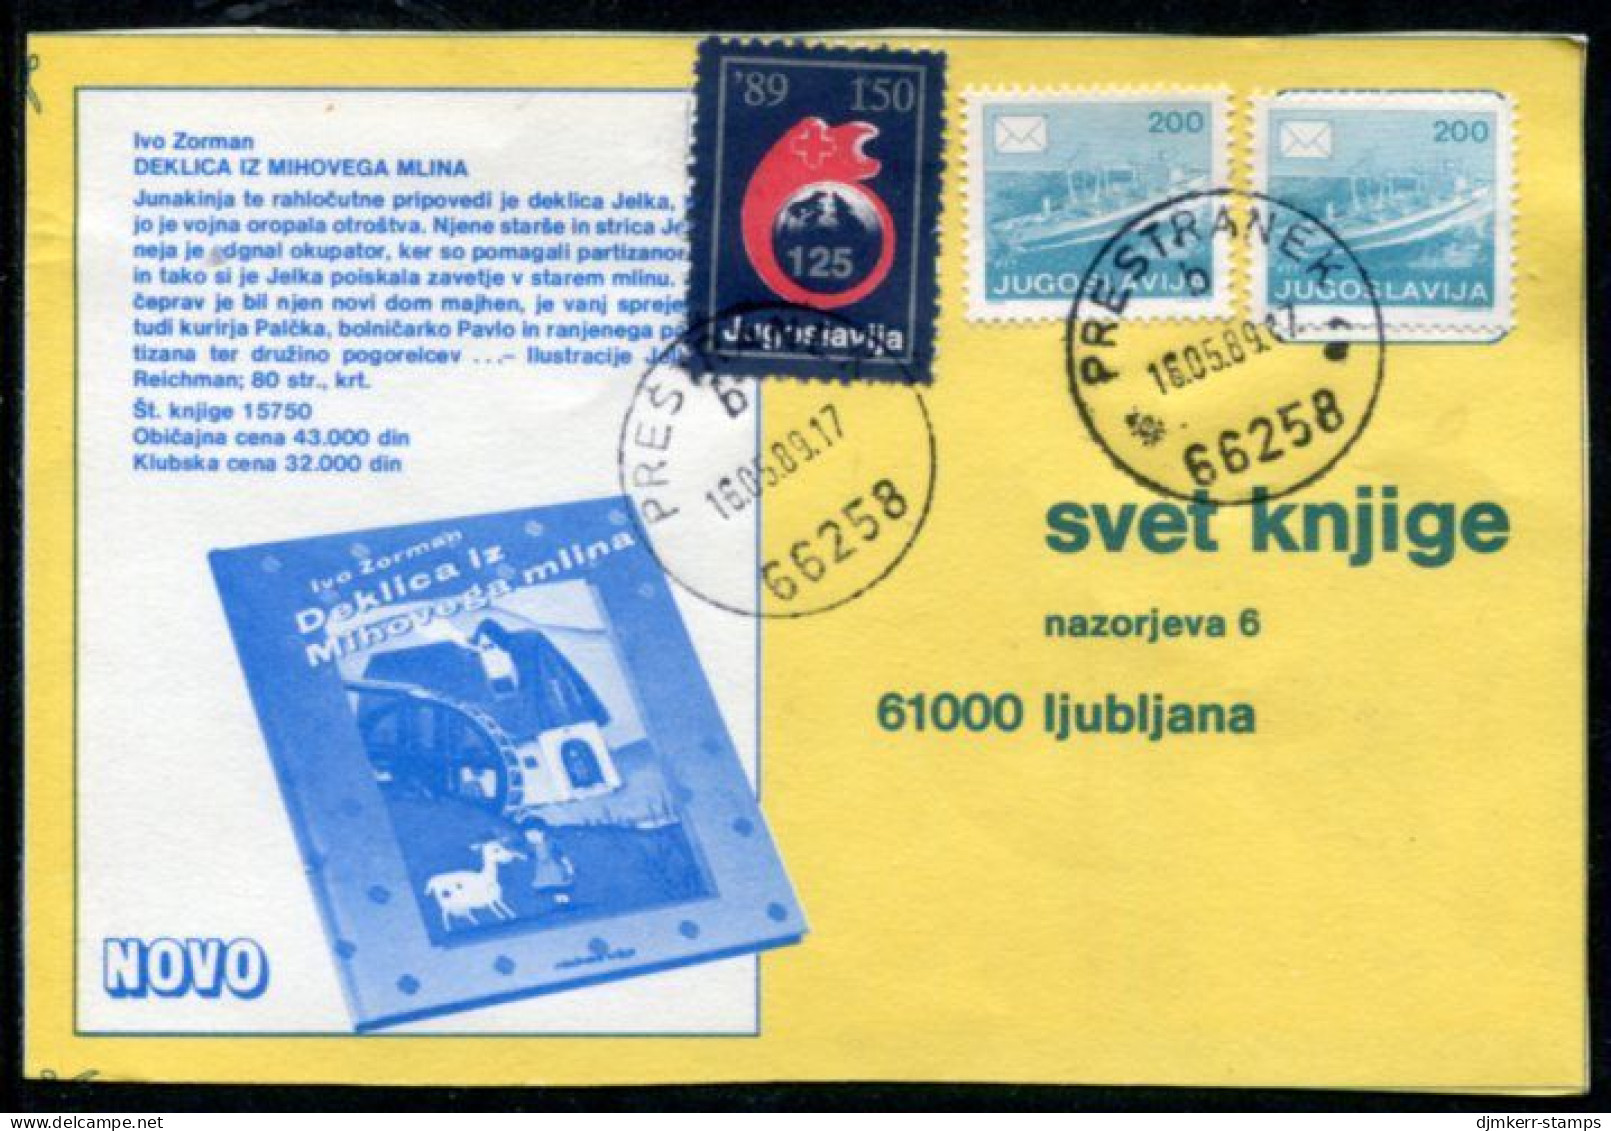 YUGOSLAVIA 1989 Red Cross Week 150 D. Tax Used On Commercial Postcard.  Michel ZZM 168 - Charity Issues